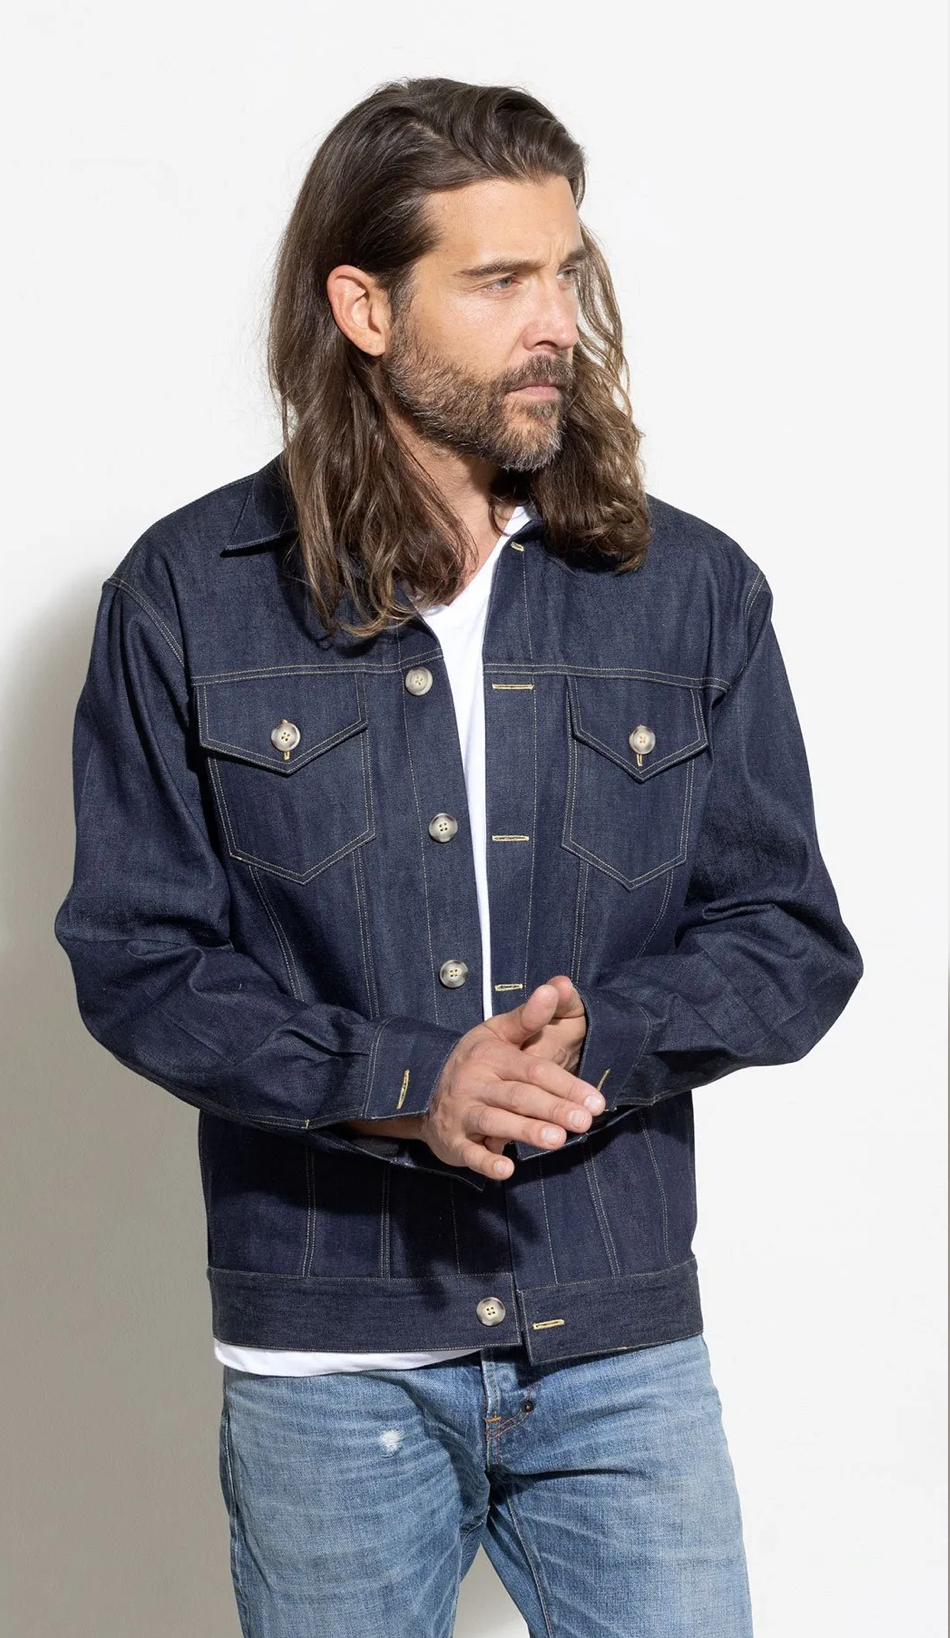 Royal 1968. Classic japanese denim jacket. Trucker cut, button down. Cut to order. Men's denim jacket available at Rustic Chic Boutique Mackinac Island, Michigan